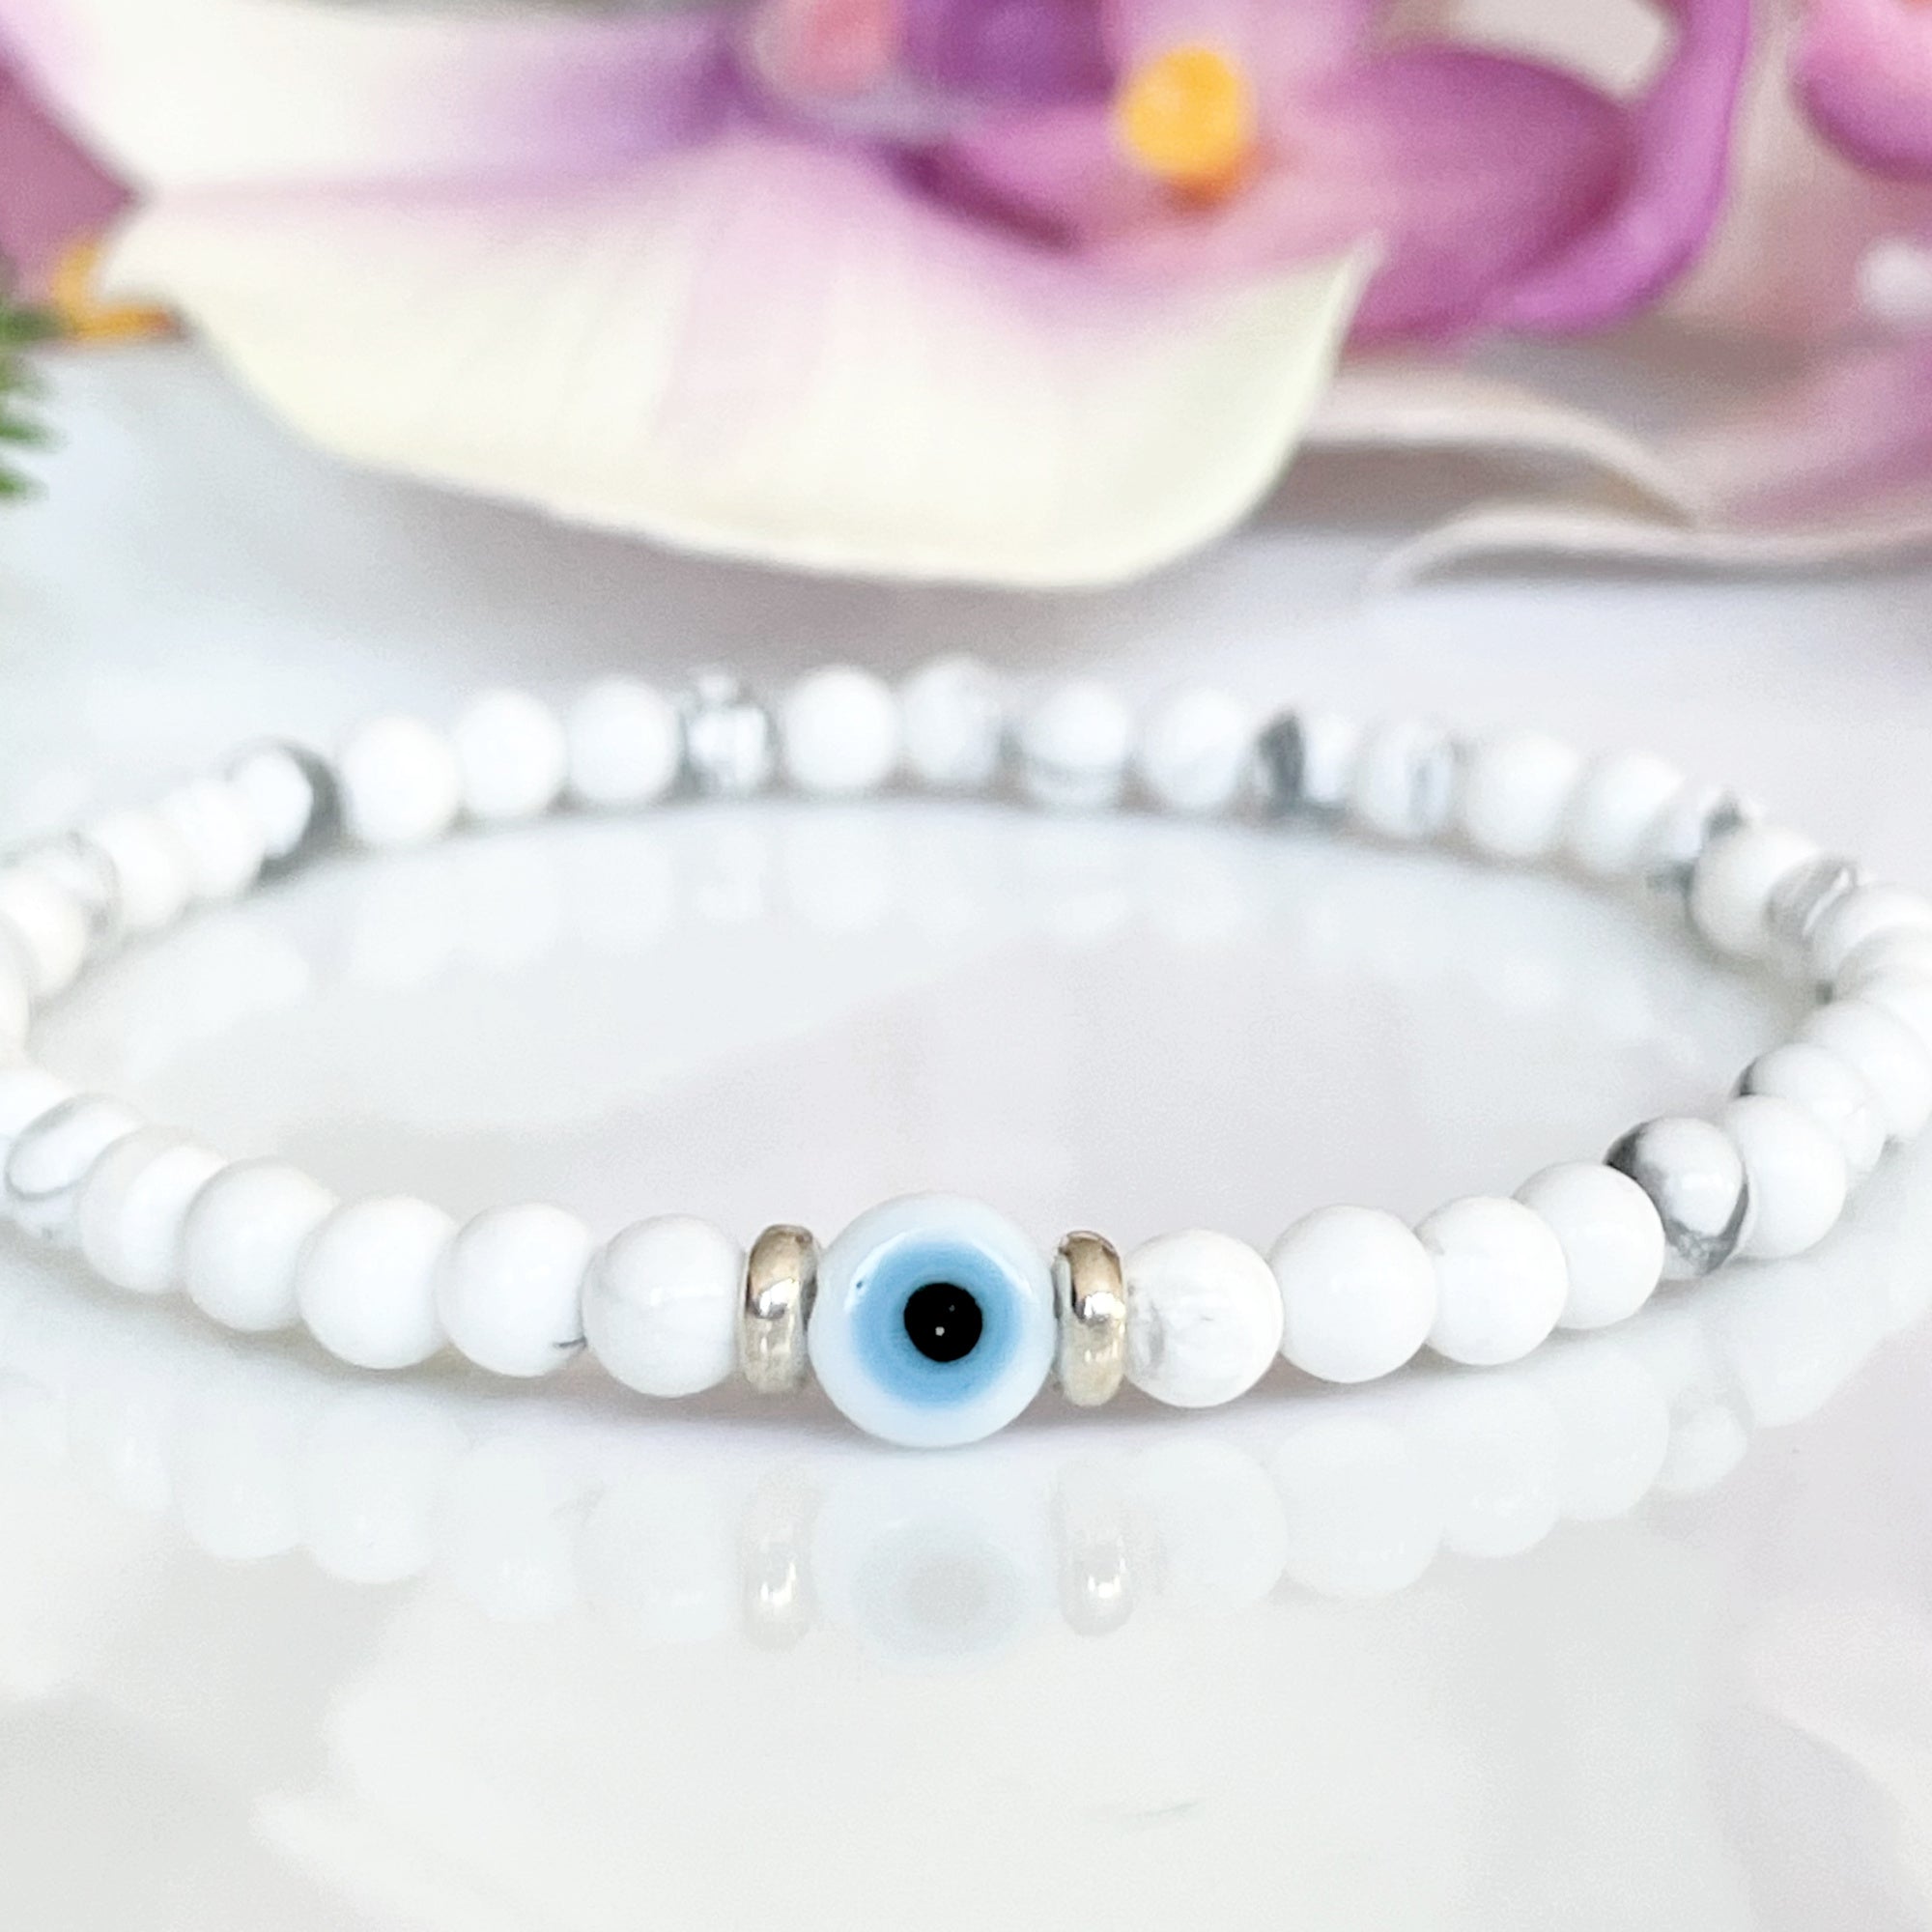 Small White Beaded Evil Eye Bracelet with Silver Accents